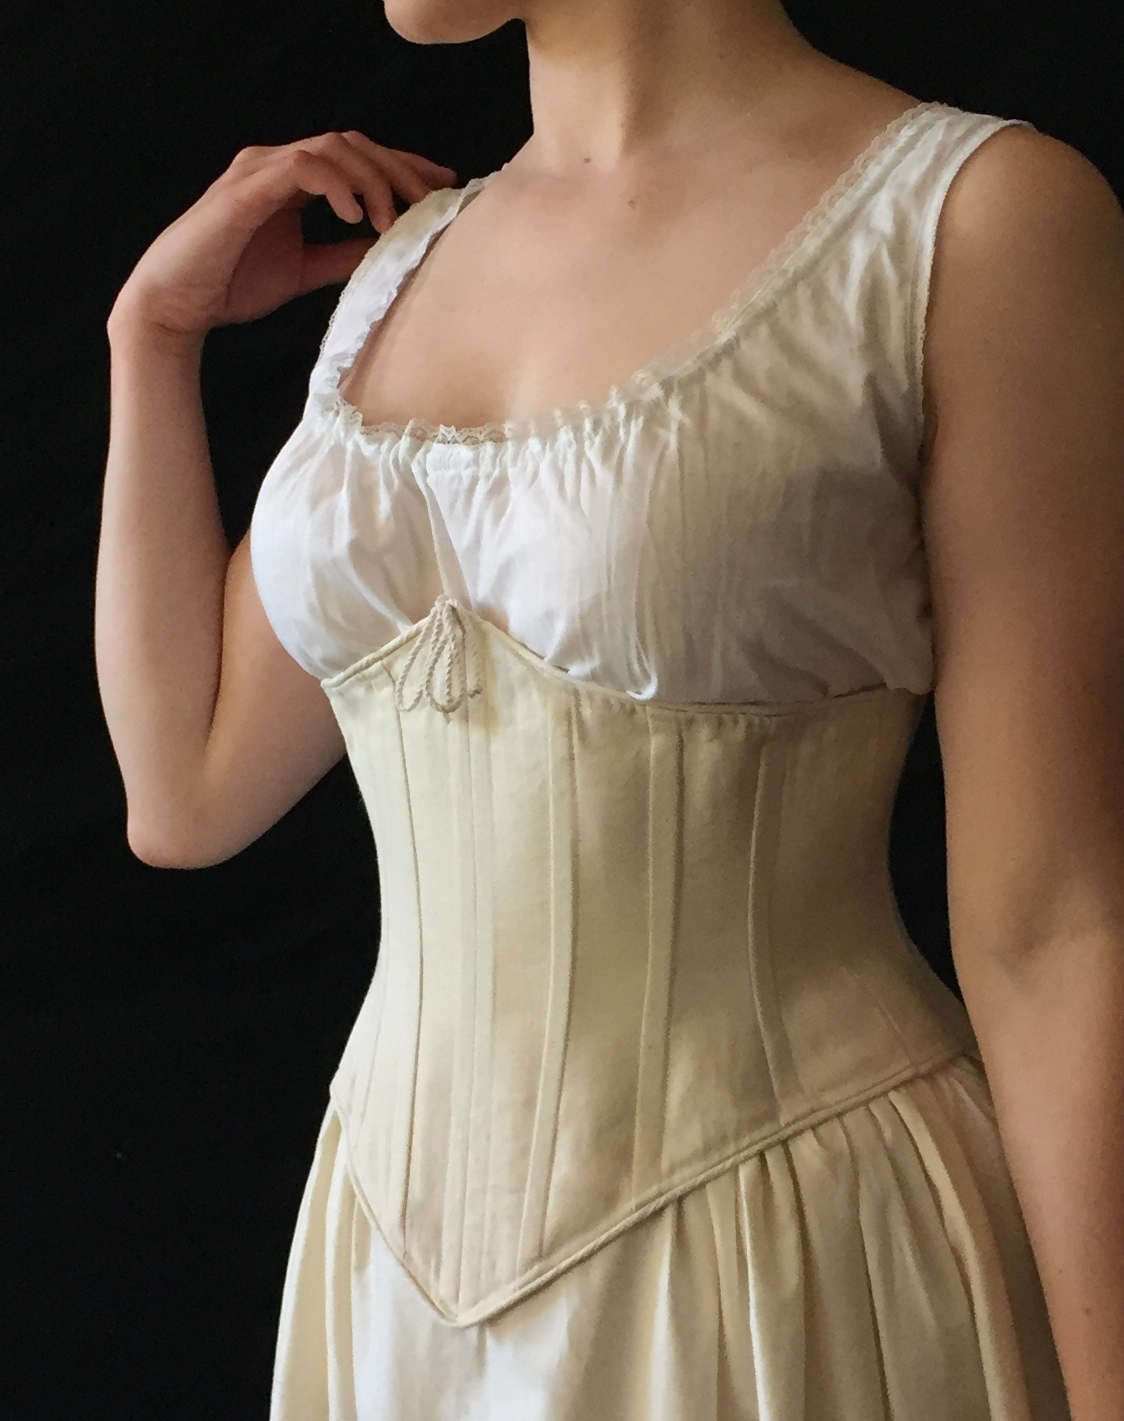 Victorian Sleeveless Chemise — Period Corsets